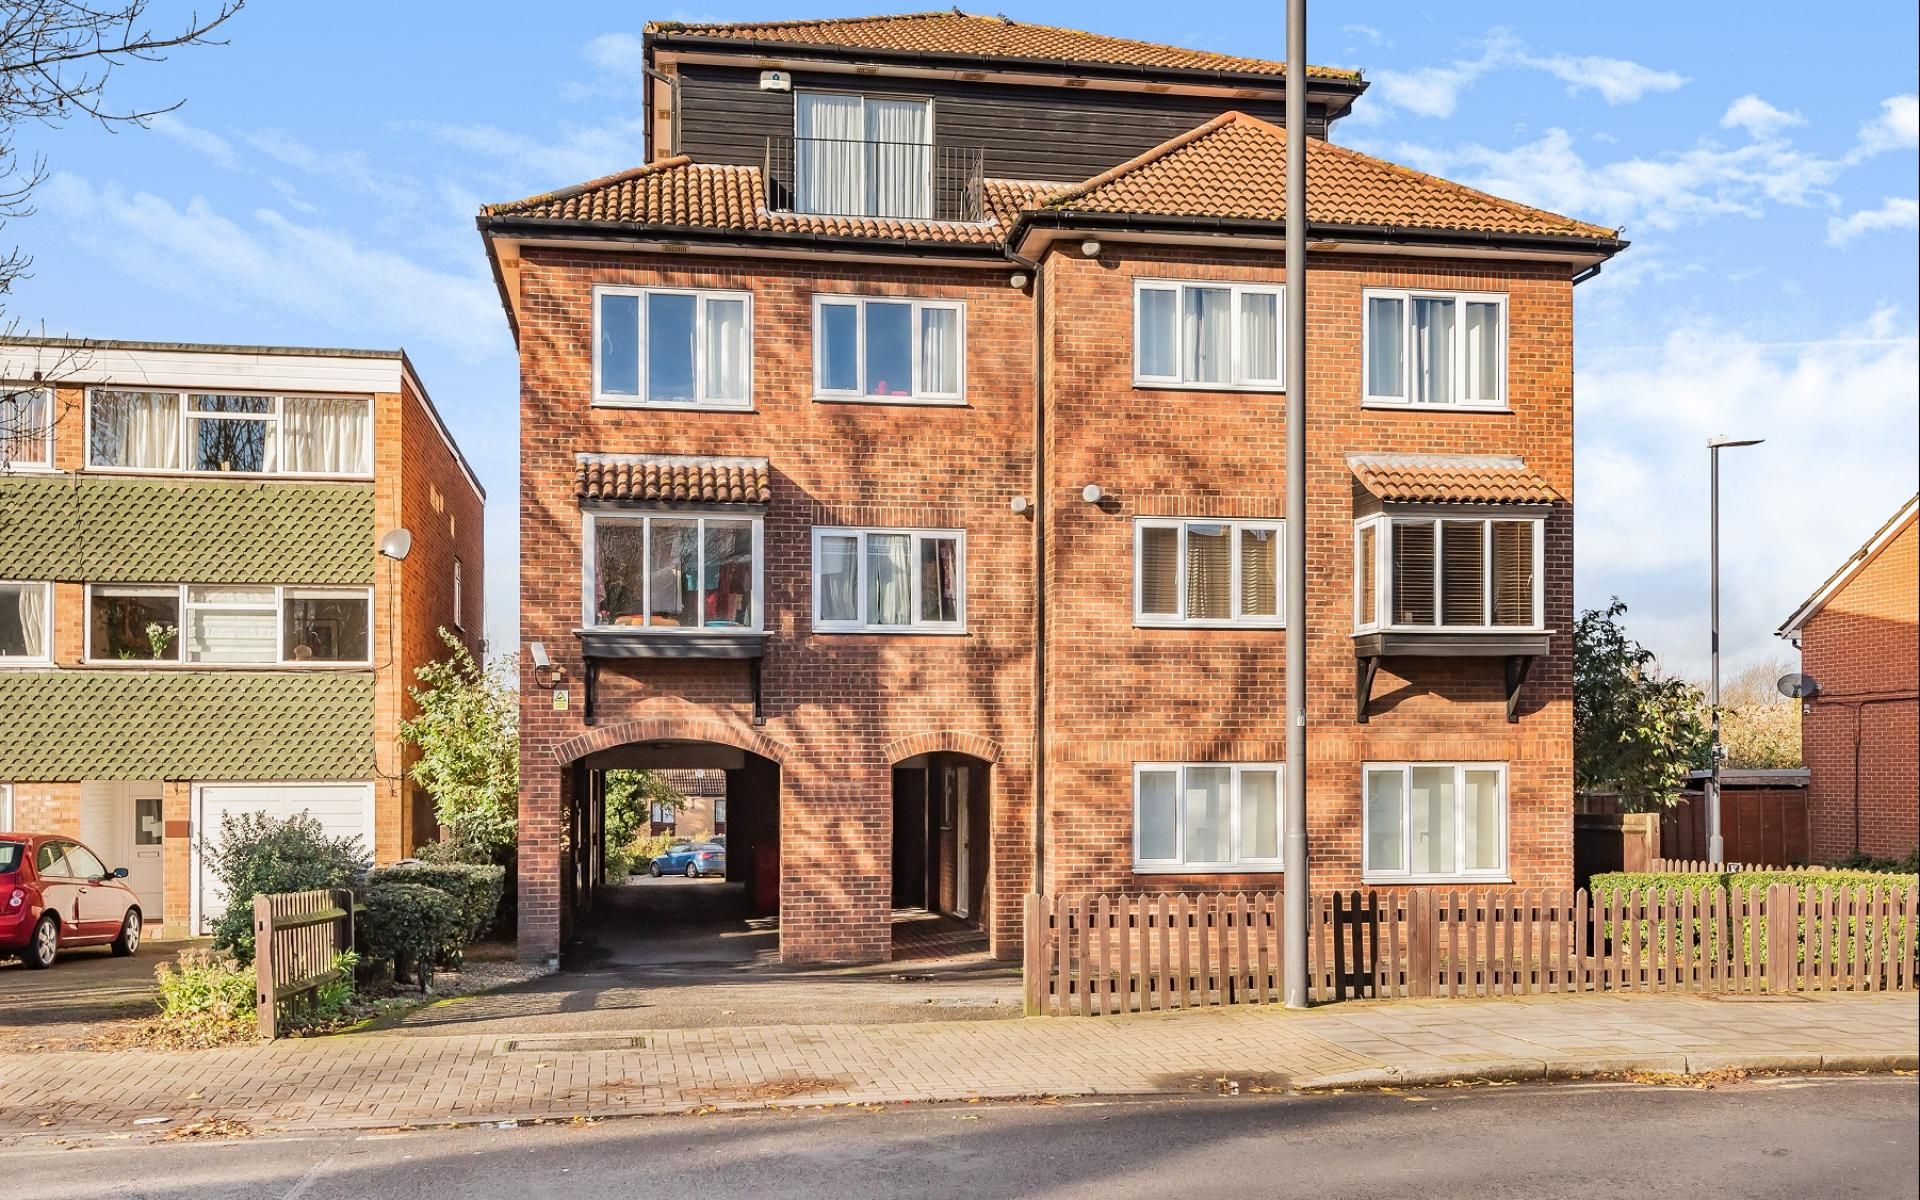 Burrell Court, Bessborough Road, Harrow on the Hill, Middlesex, HA1 3DR